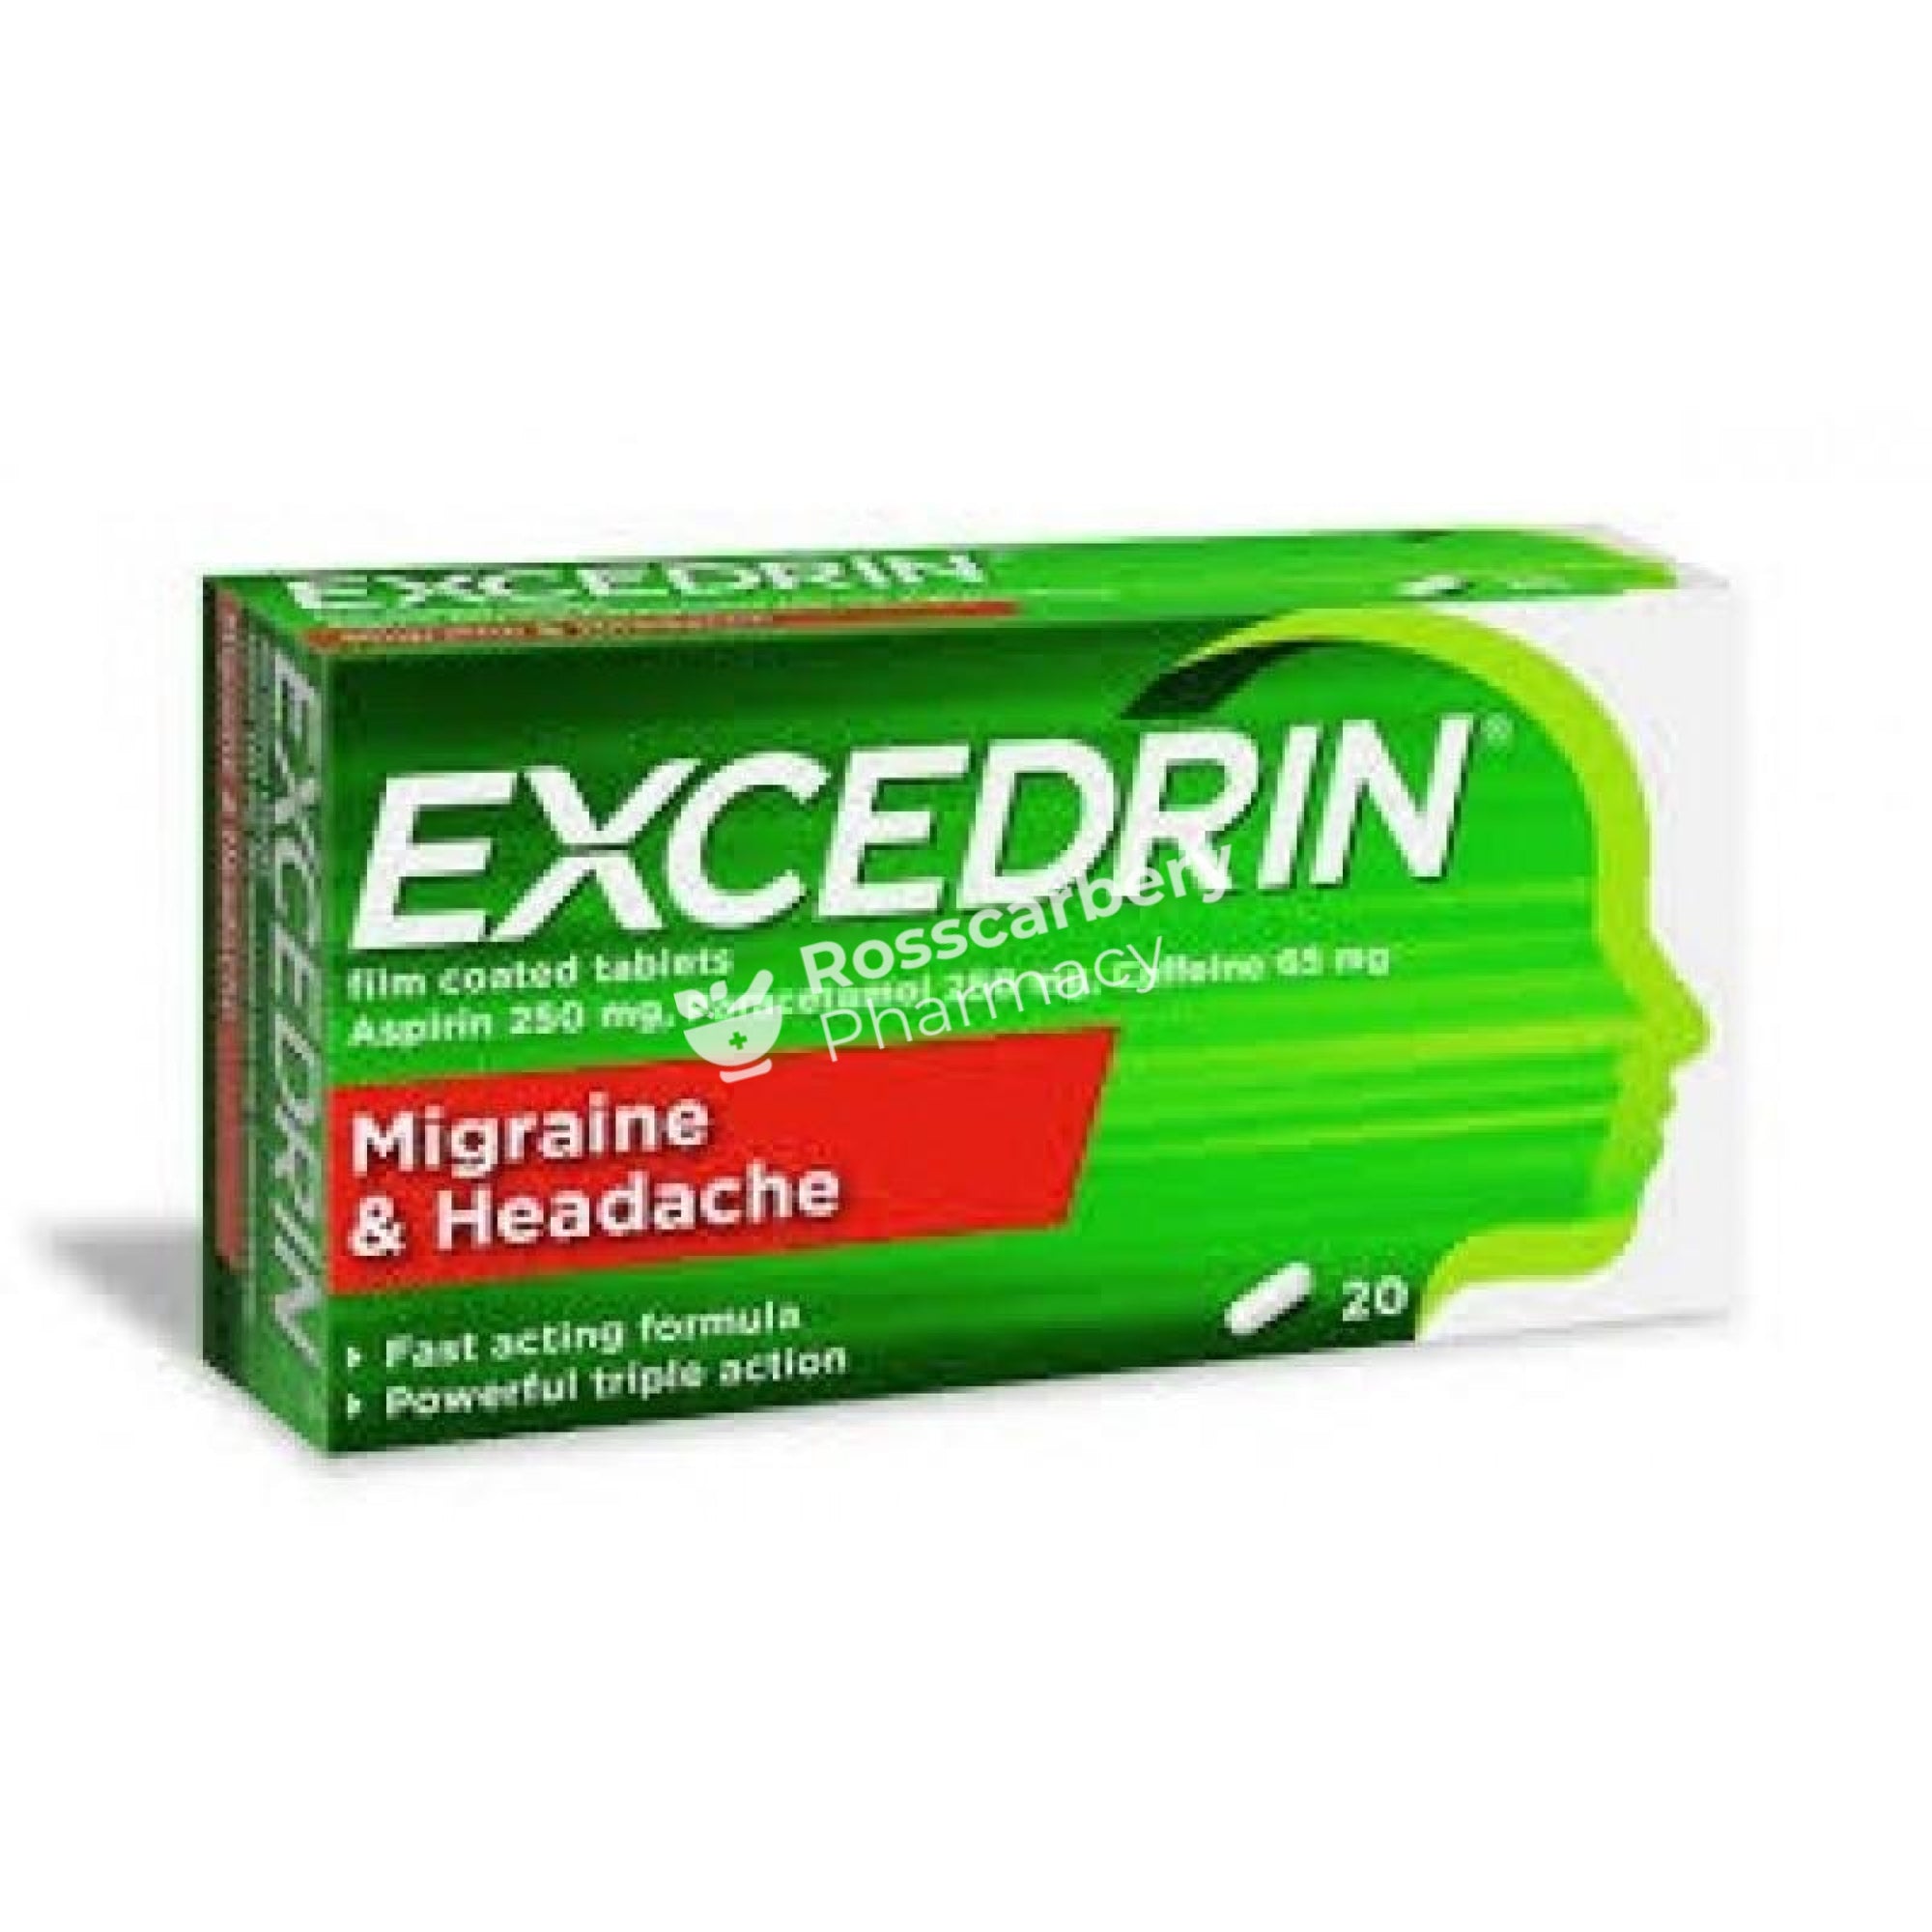 Excedrin Migraine & Headache Film-Coated Tablets Pain Relief